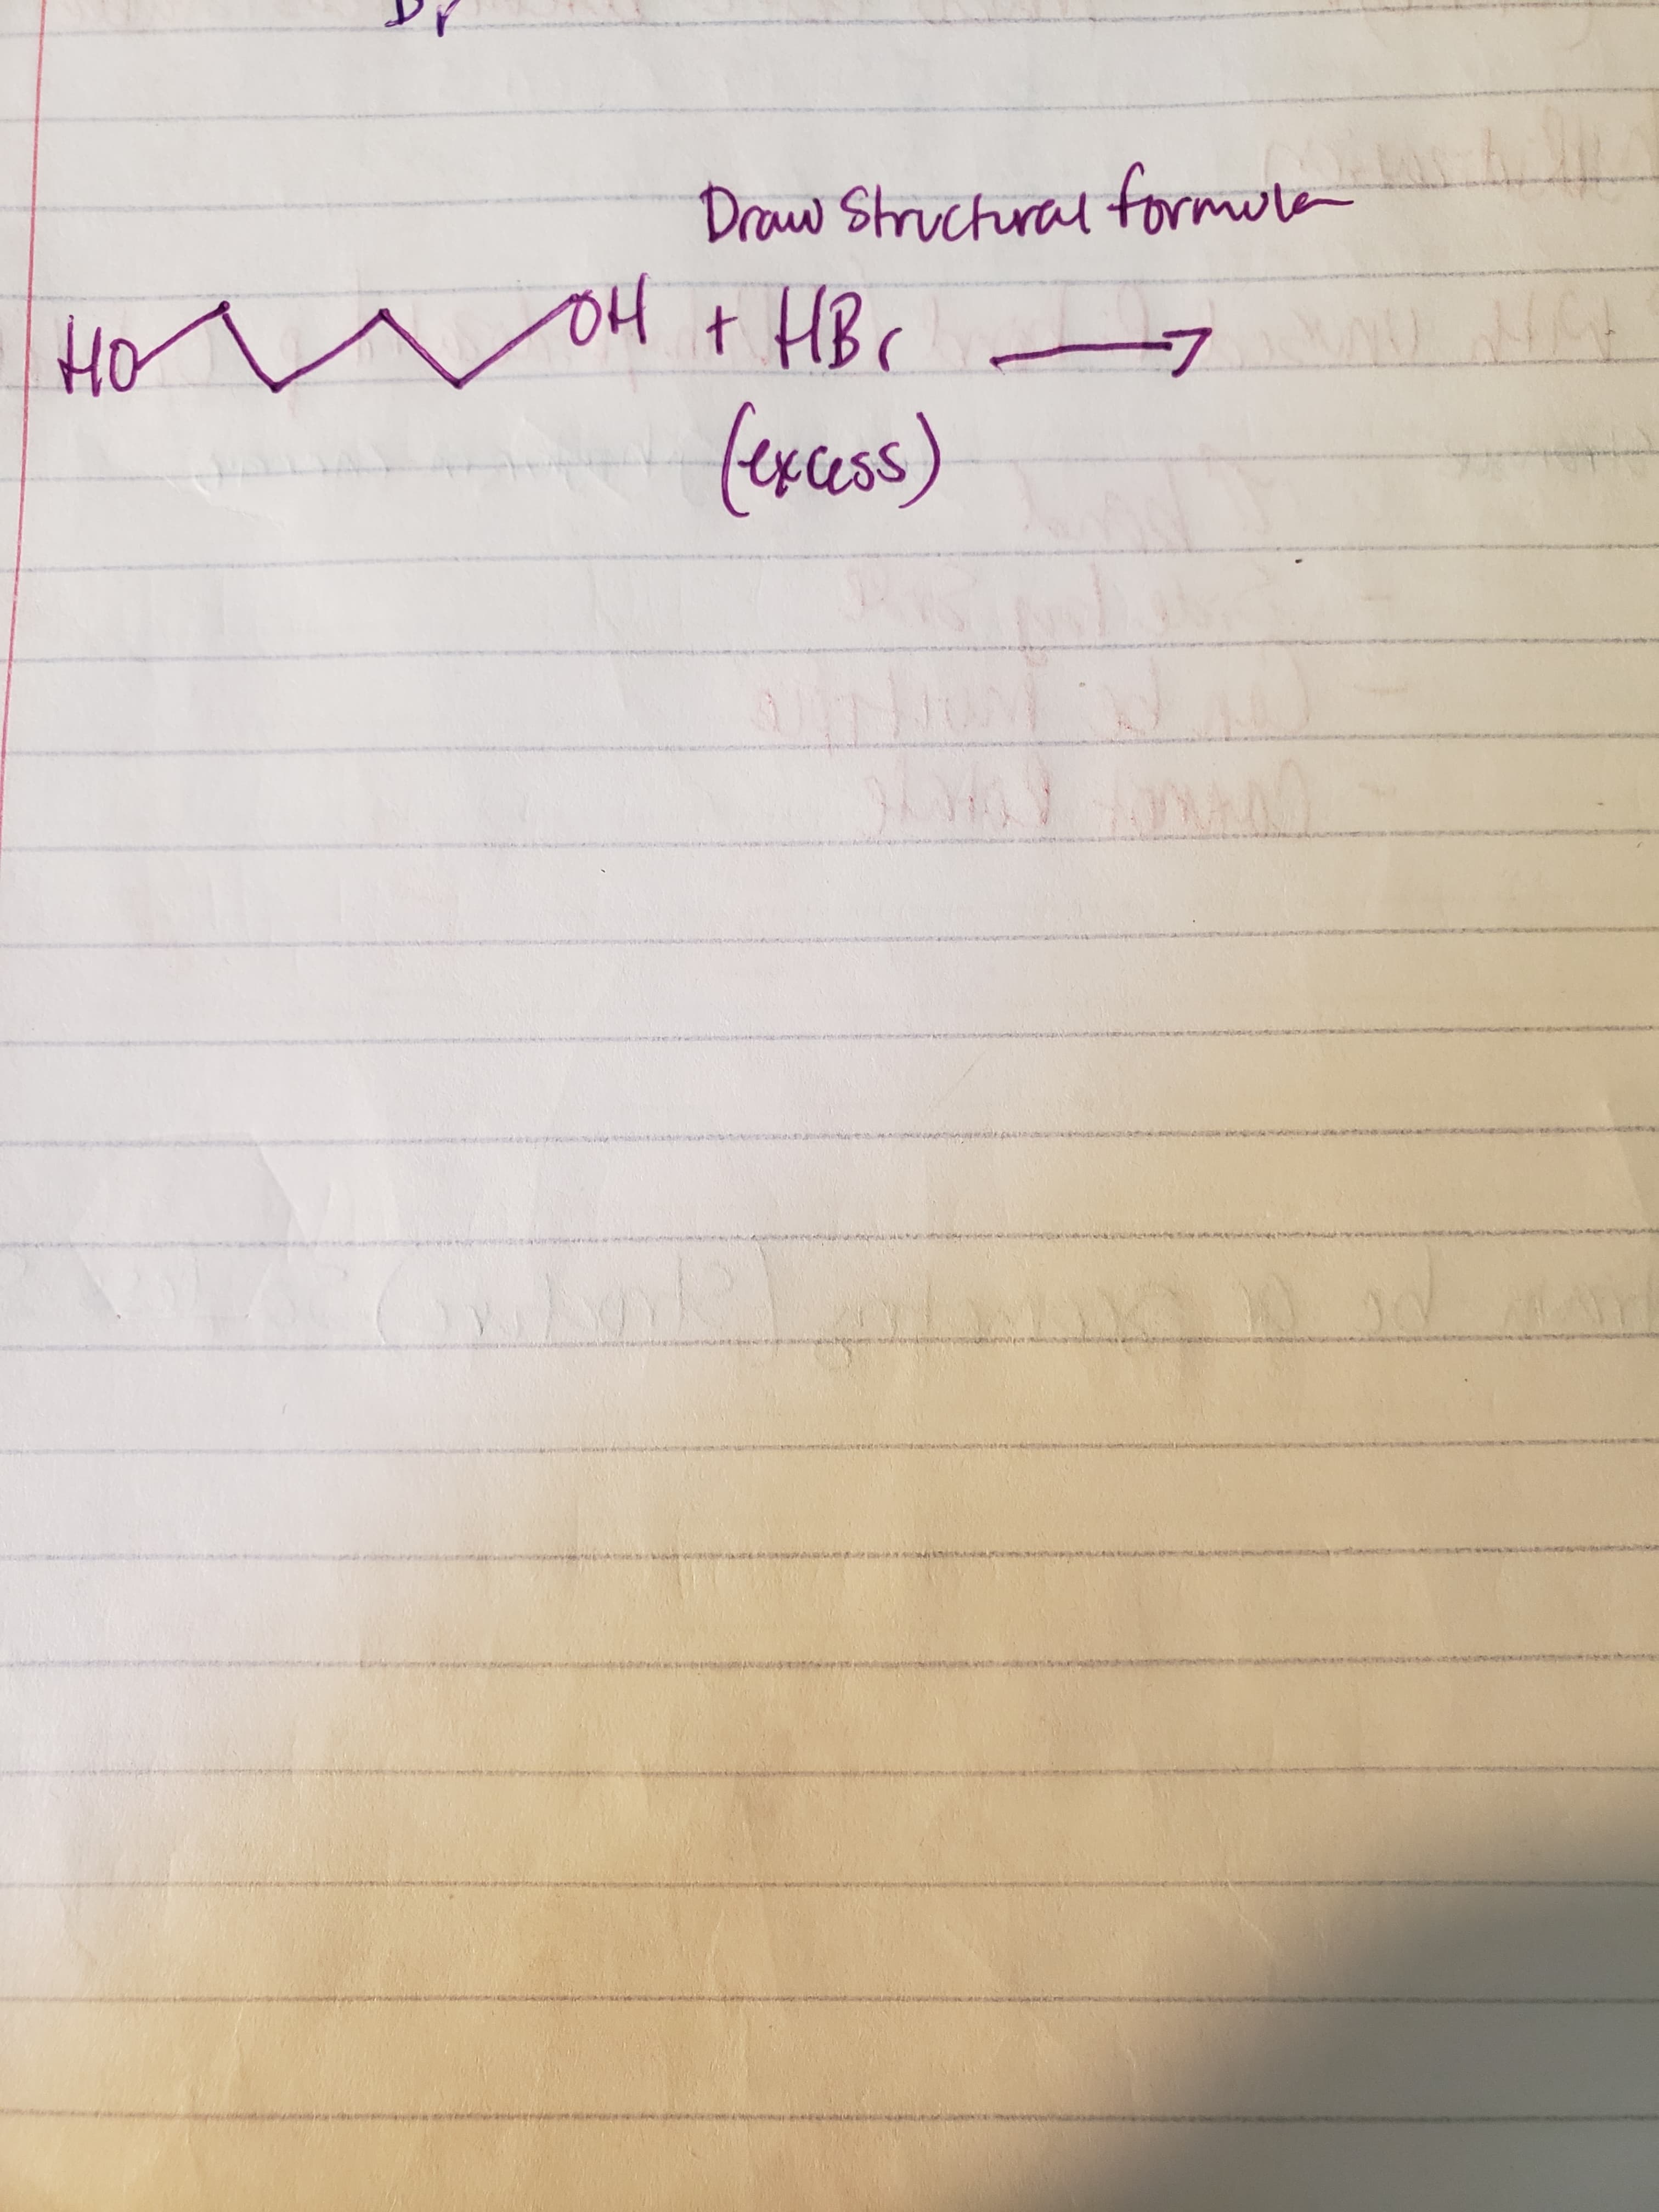 Draw Structural
formula
OH t HBc -
Ho
(esass)
